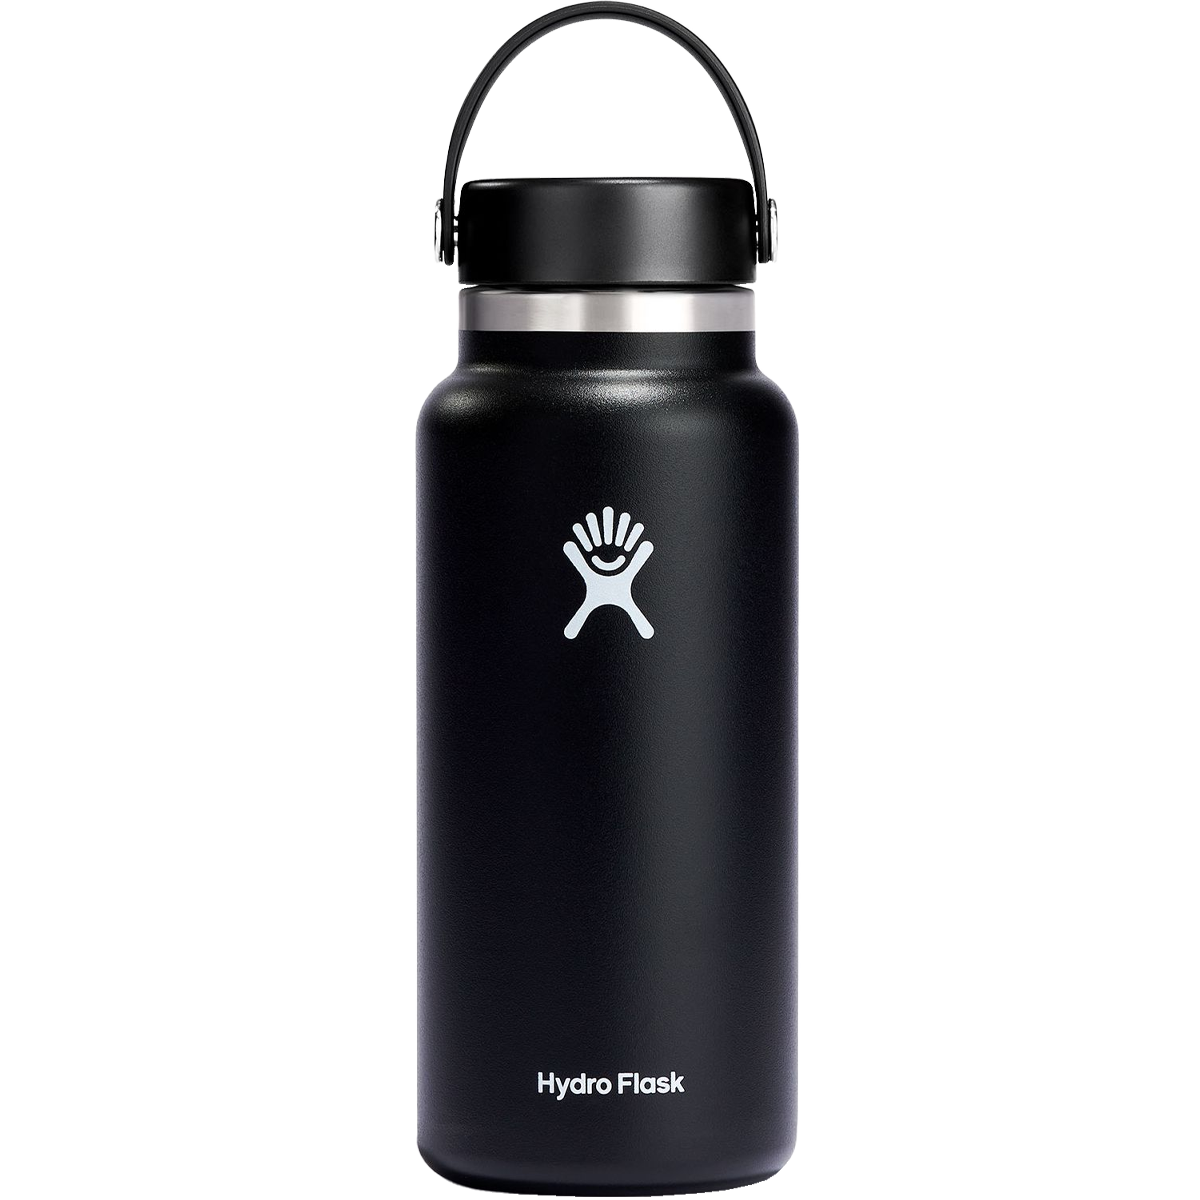 Hydro Flask 32 oz Double Wall Vacuum Insulated Stainless Steel Travel  Tumbler Cup with BPA Free Press-In Lid, Stainless